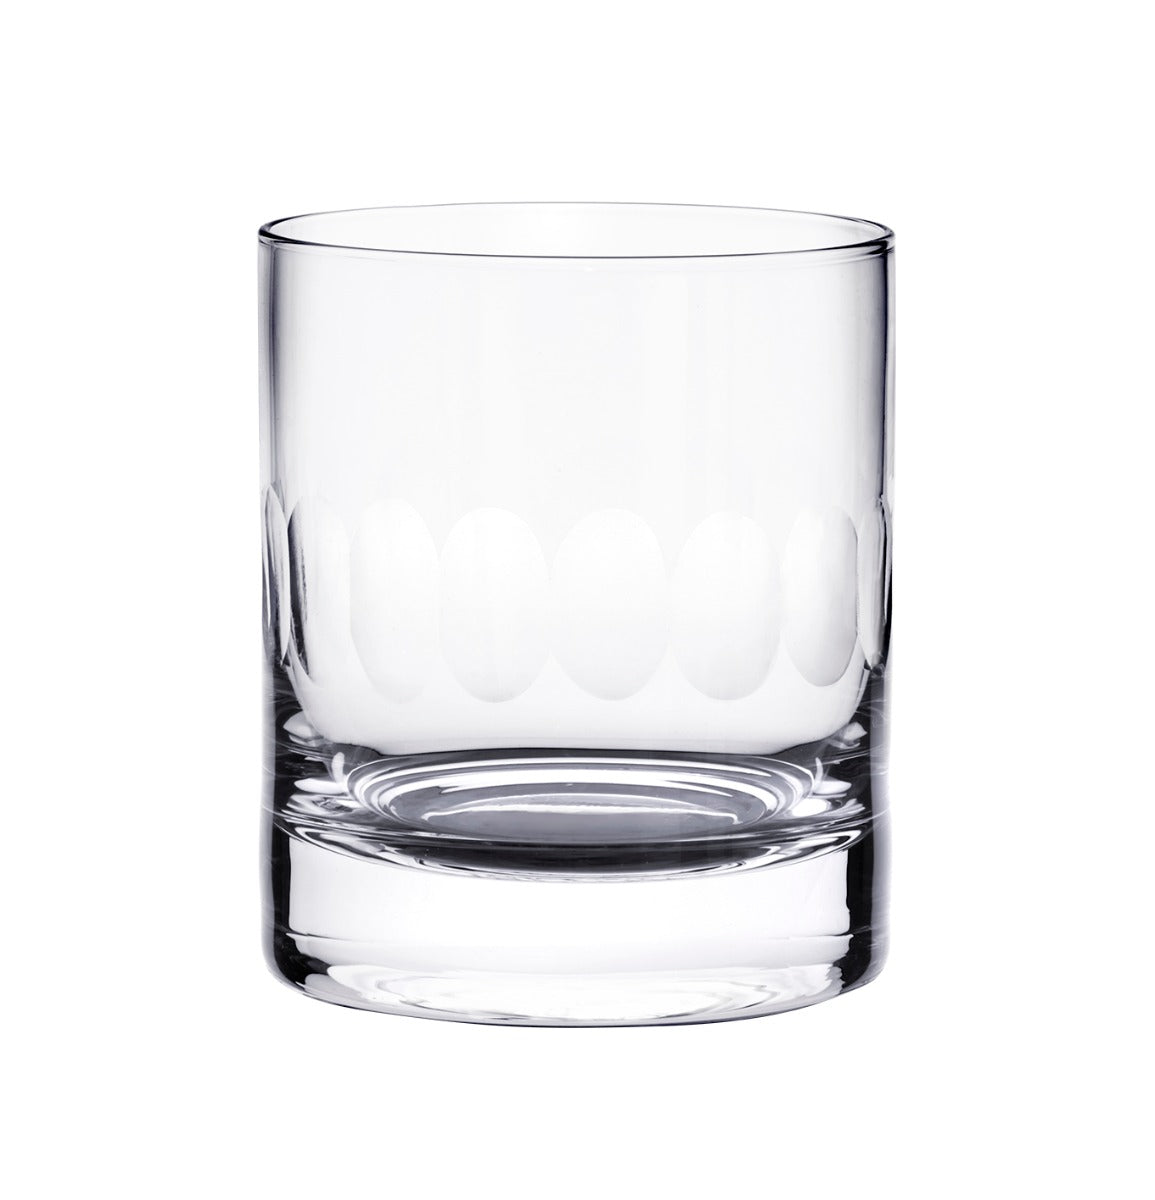 The Vintage List Crystal Lens Whiskey Glass